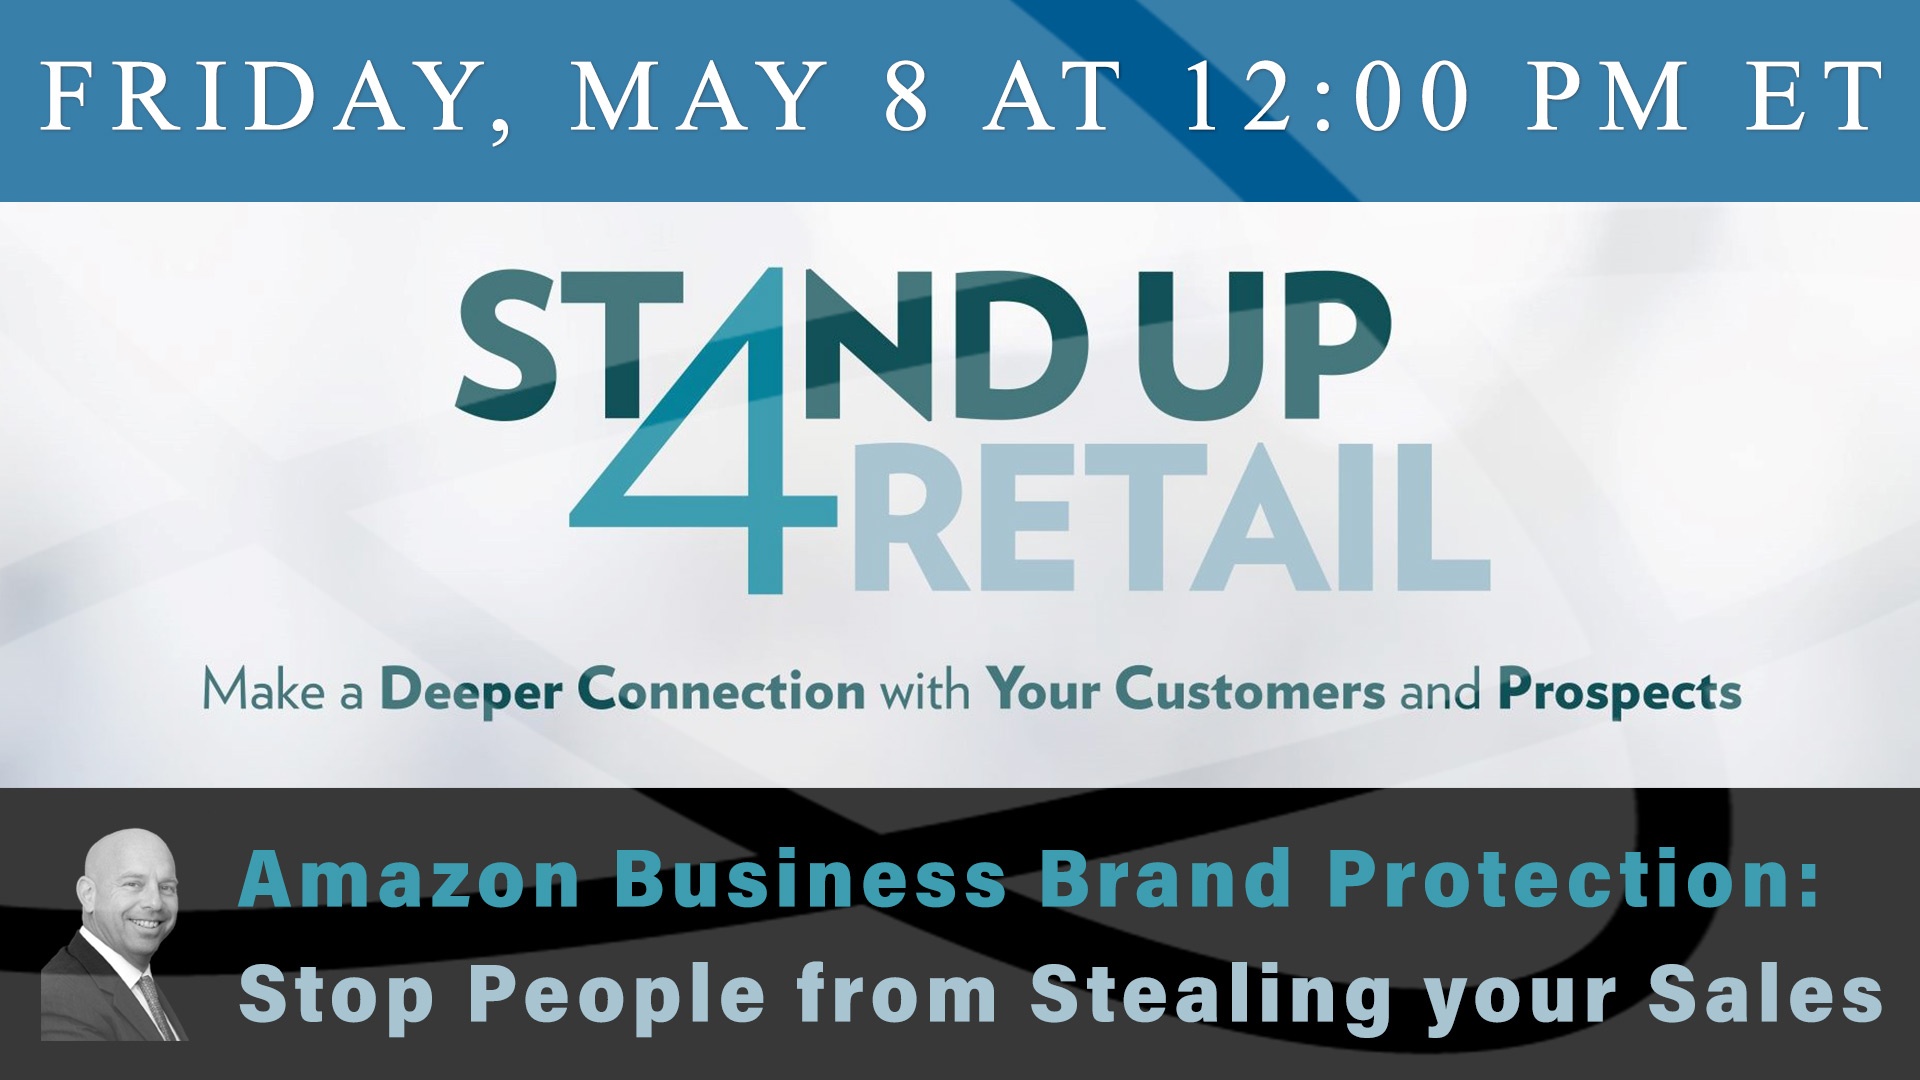 Amazon Business Brand Protection Safeguard Yourself to Stop People from Stealing your Sales